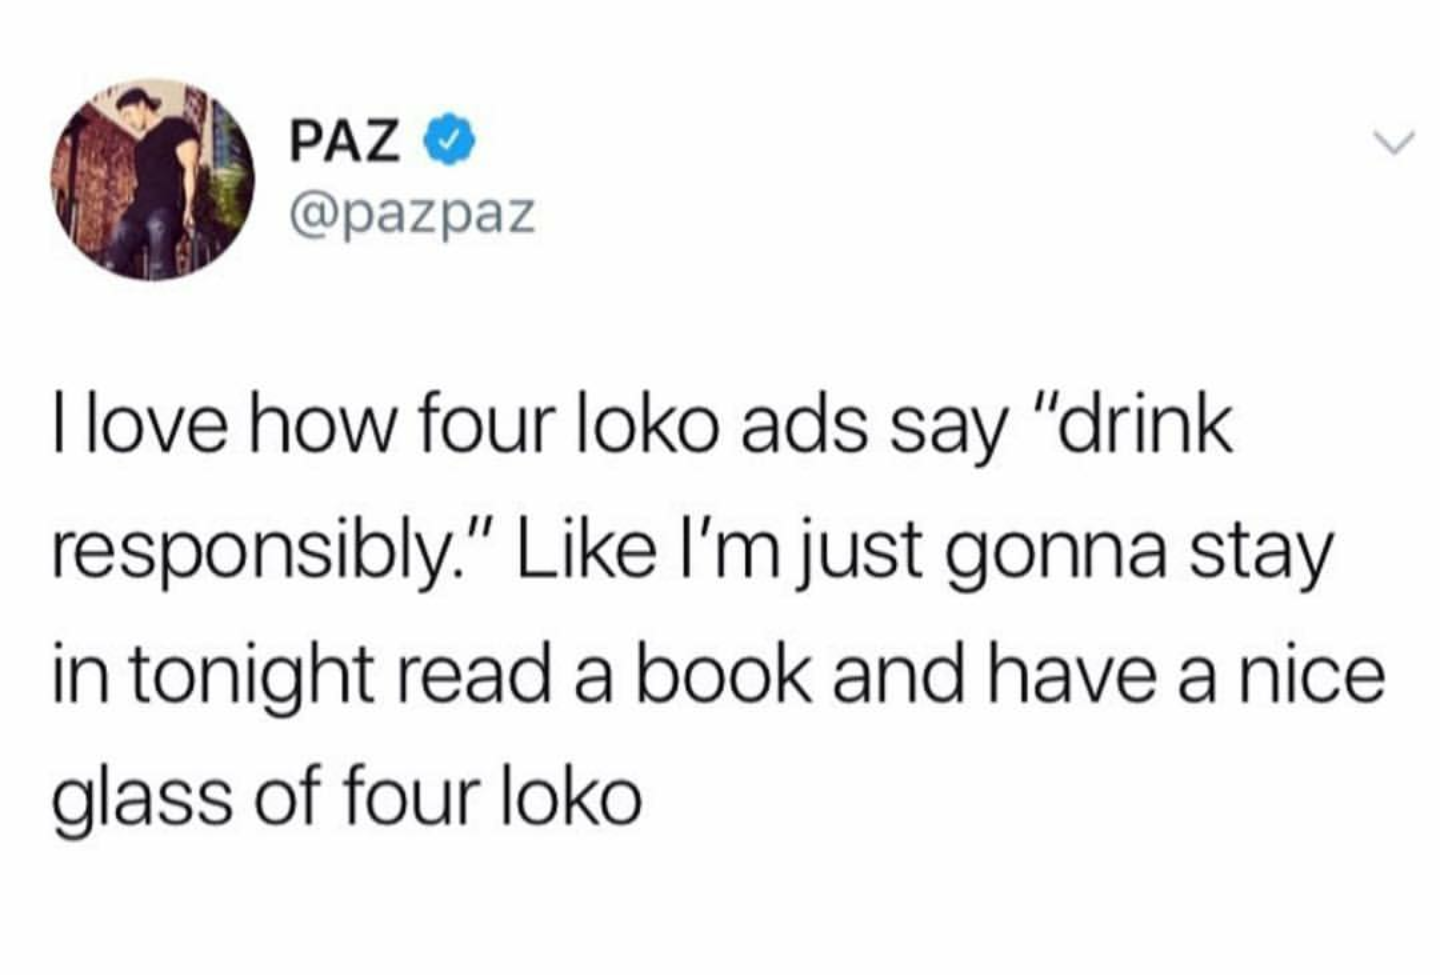 my current body type - Paz I love how four loko ads say "drink responsibly." I'm just gonna stay in tonight read a book and have a nice glass of four loko